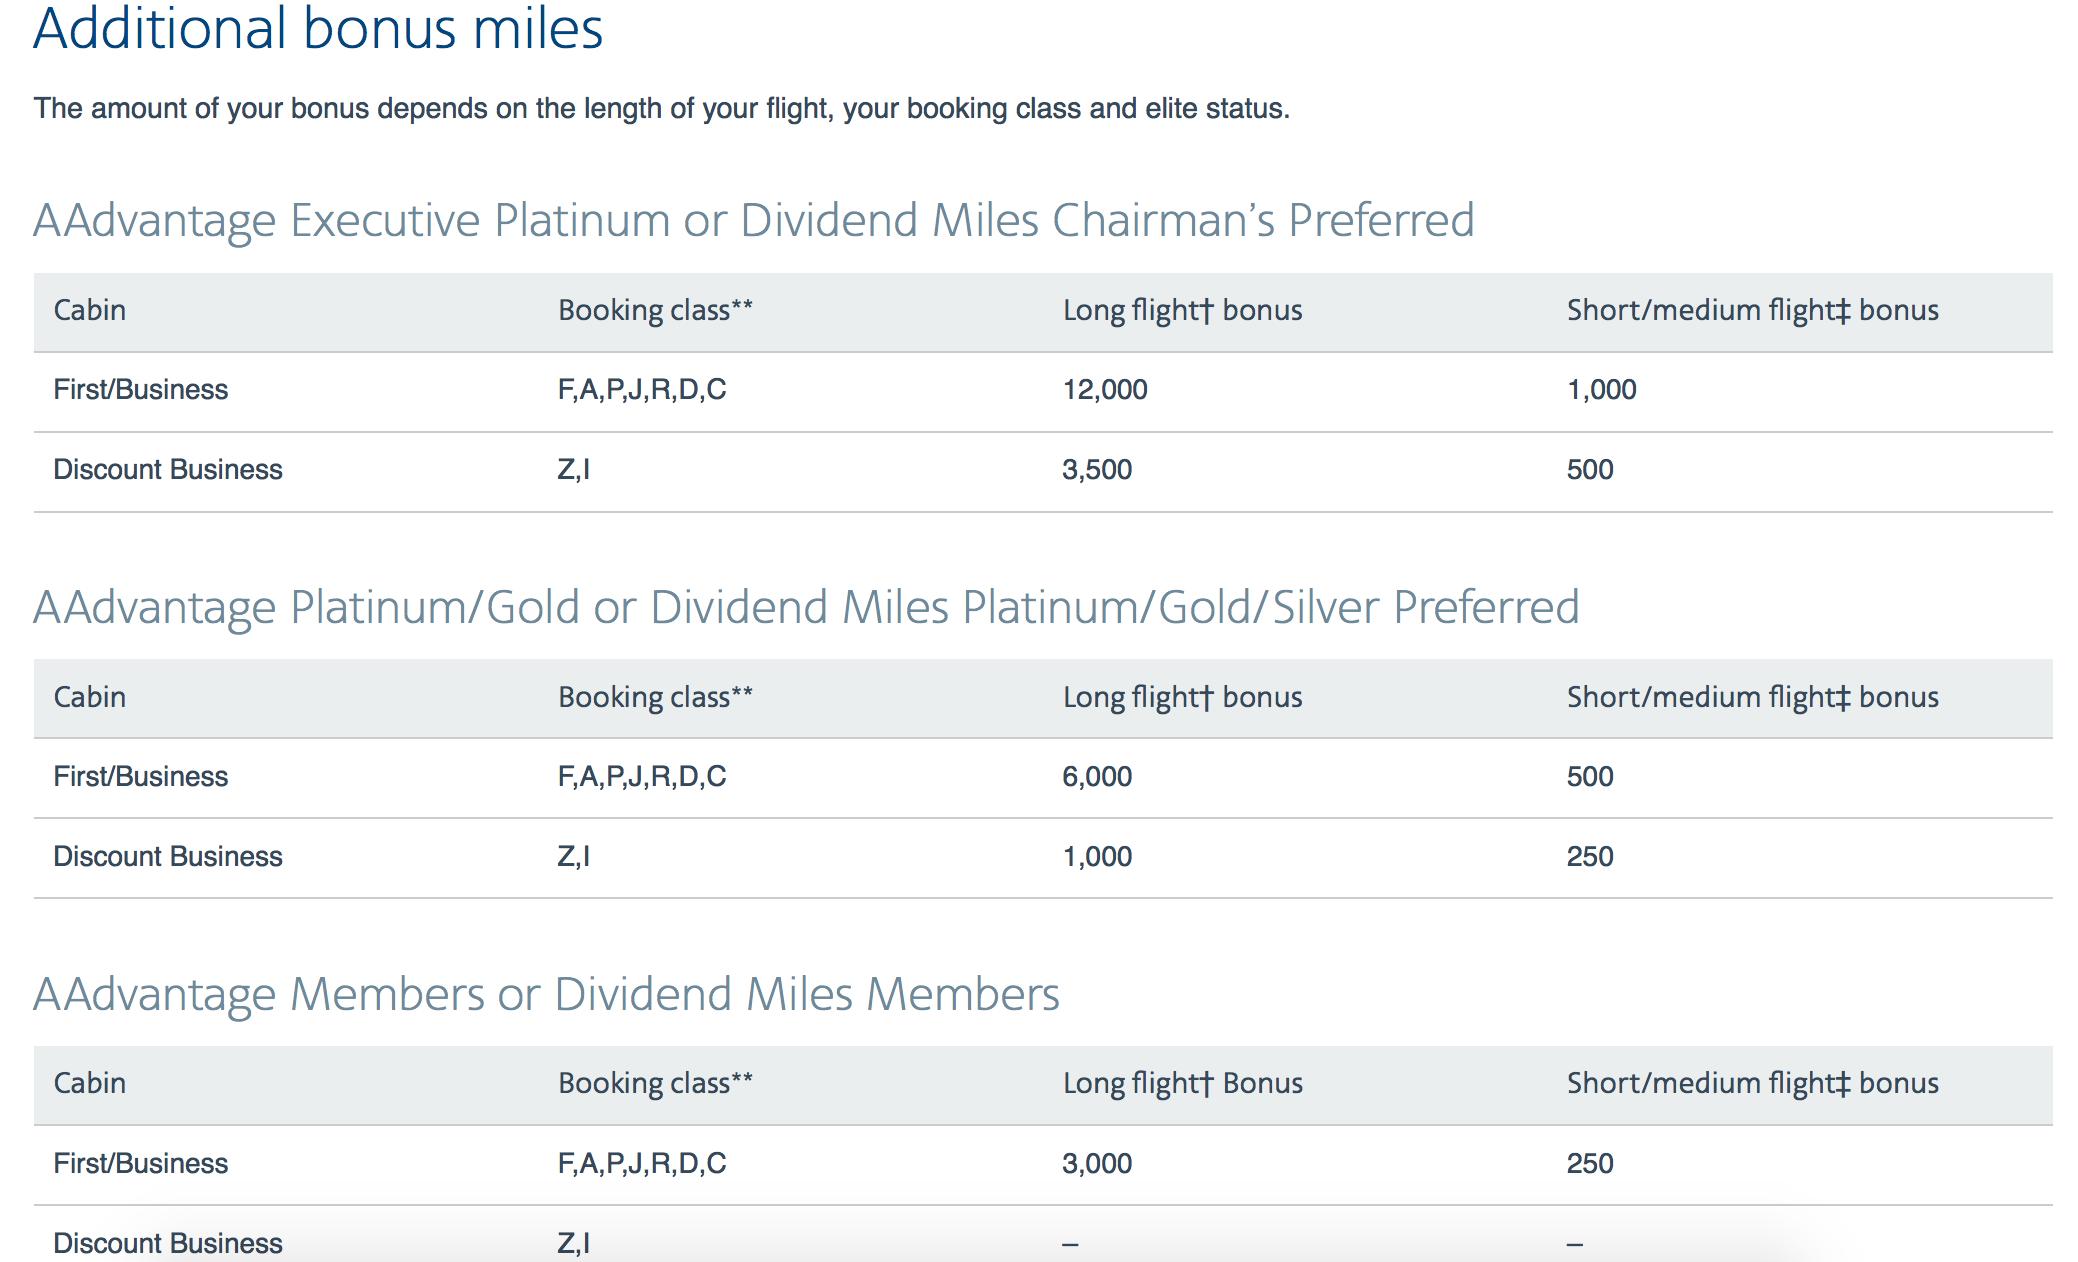 American Airlines to award up to 12,000 bonus miles per flight The